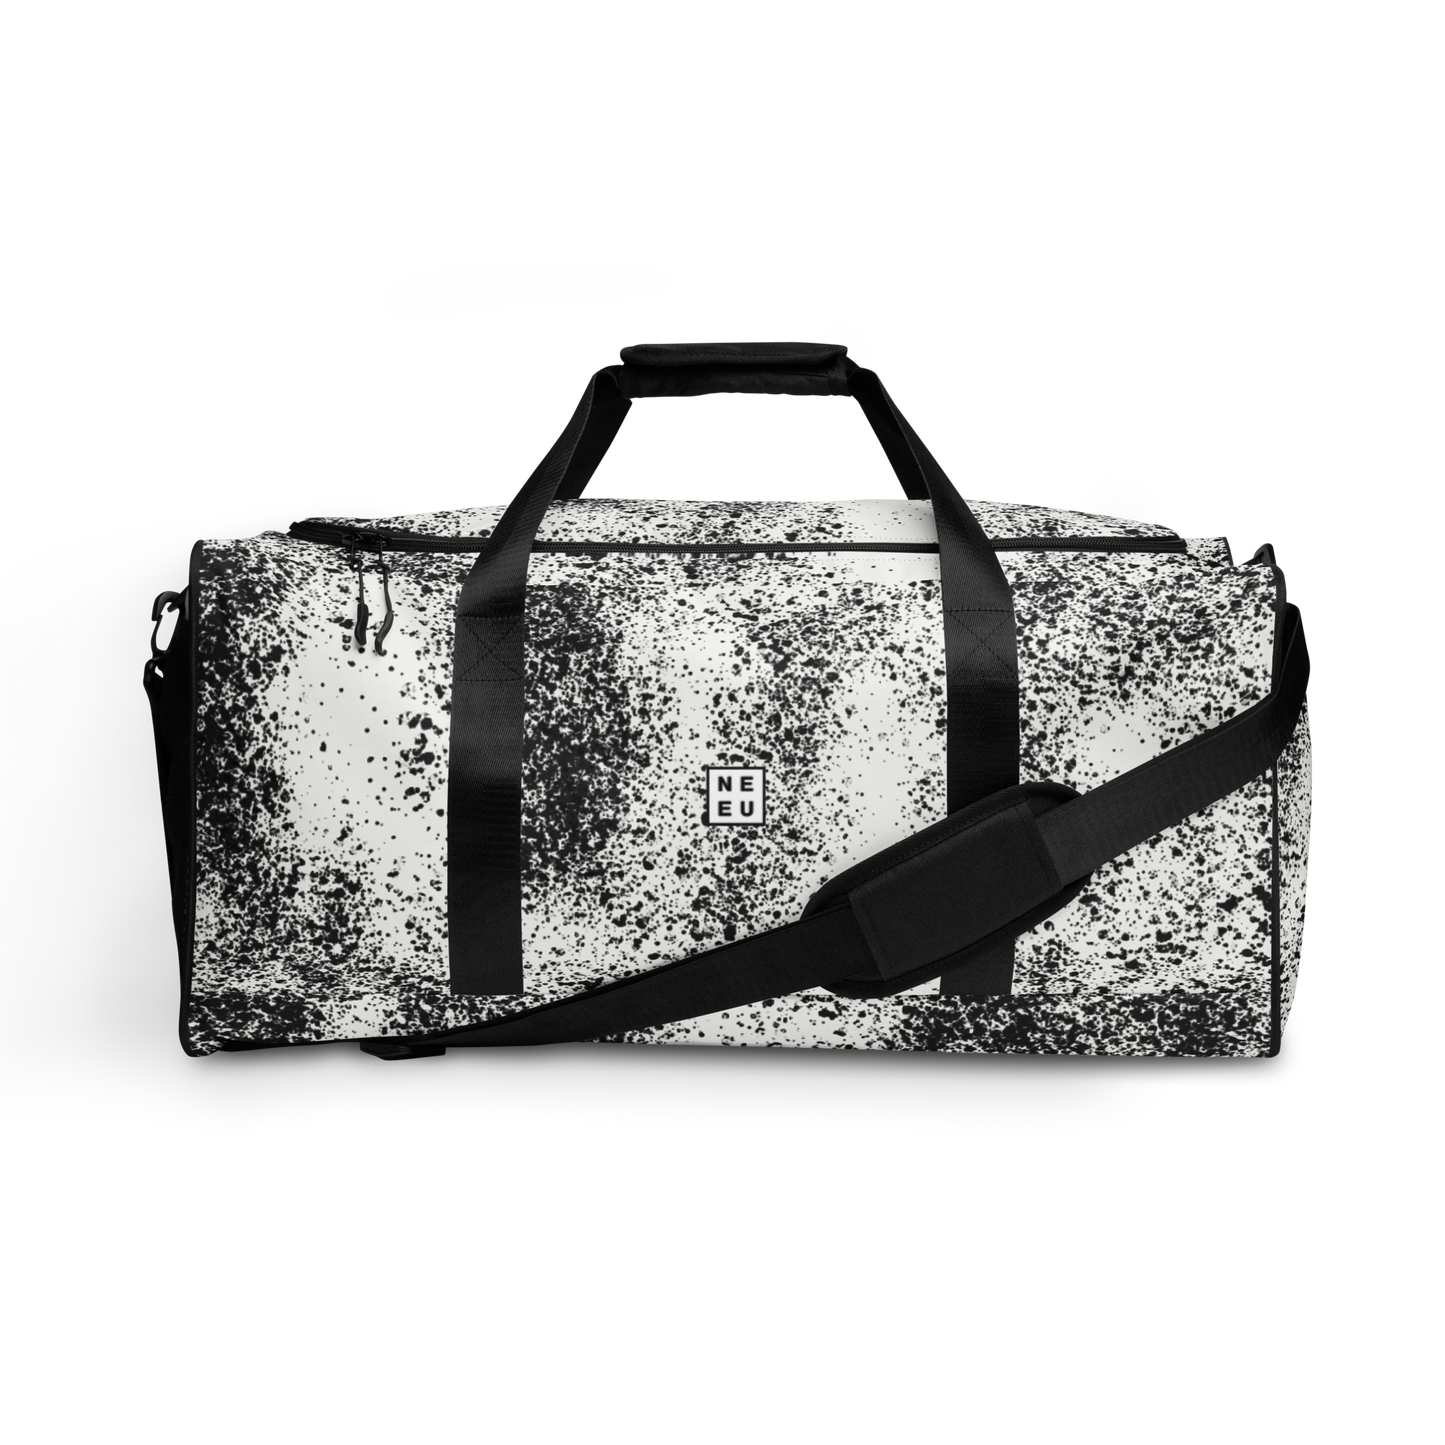 New City Adventure duffle bag in black and white speckle pattern front view with strap